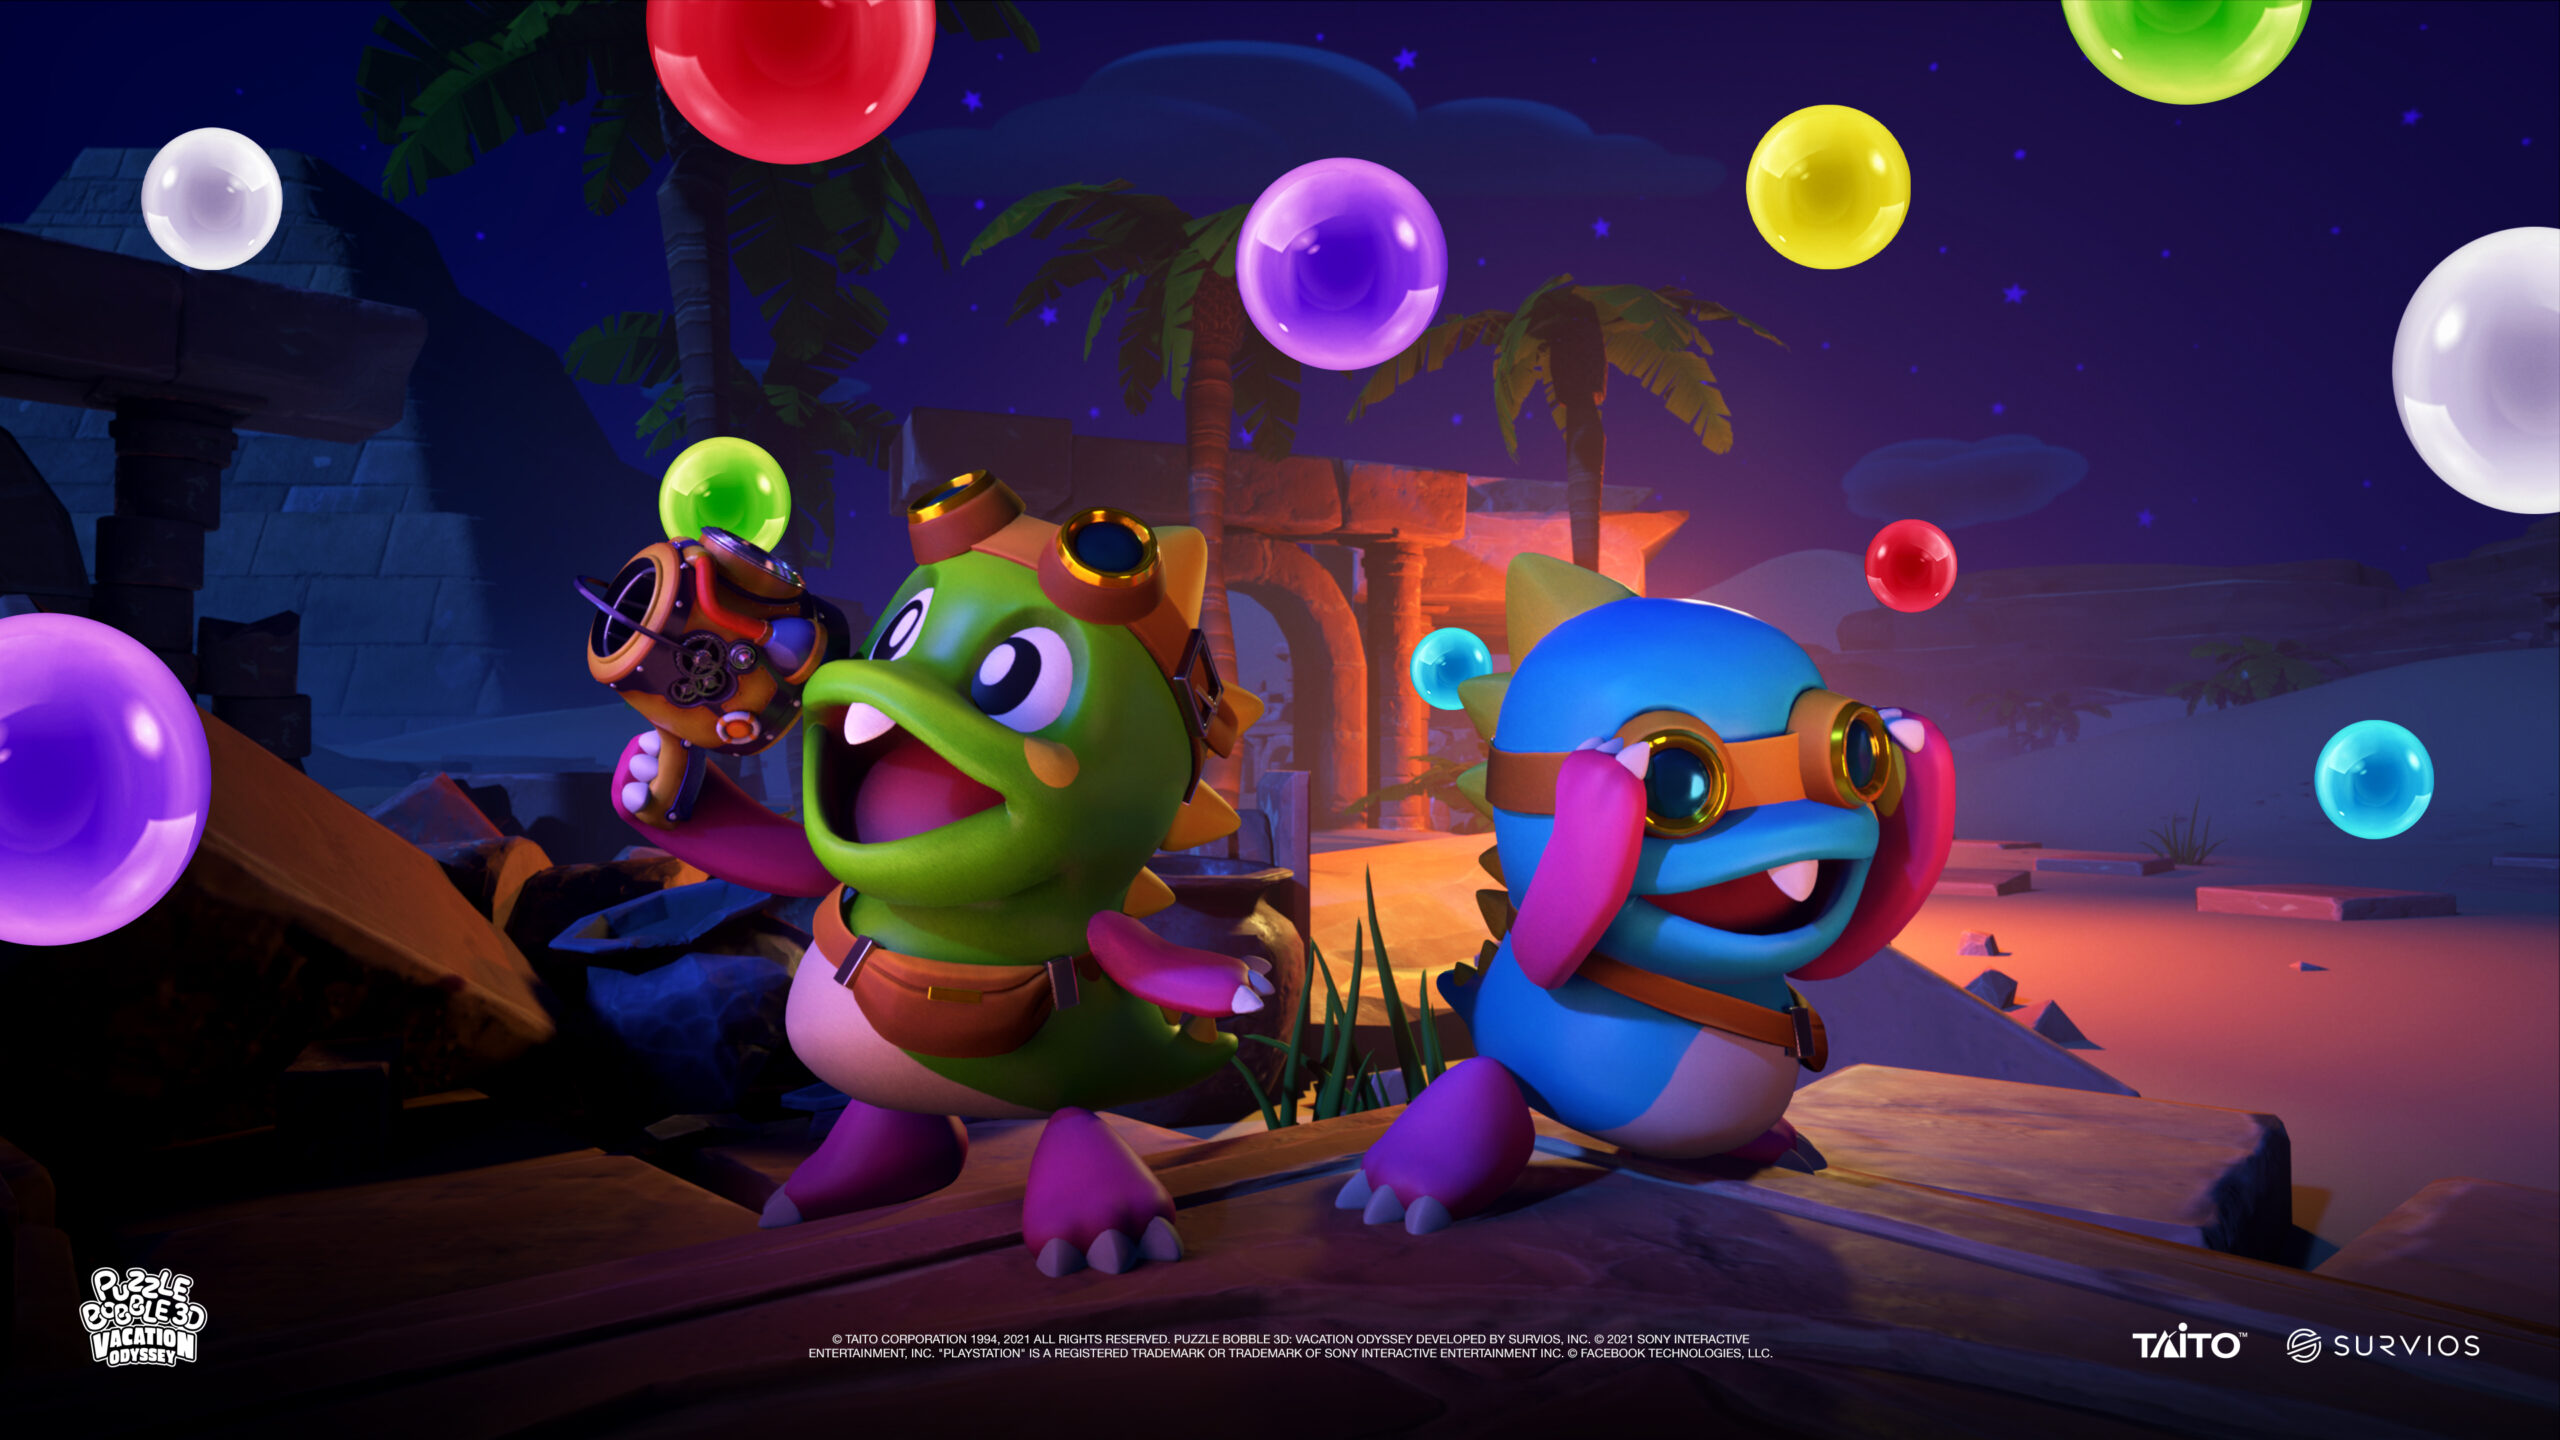 ugunstige fossil Funktionsfejl Puzzle Bobble 3D: Vacation Odyssey Out Now on PS4, PS5 and PS VR! - Survios